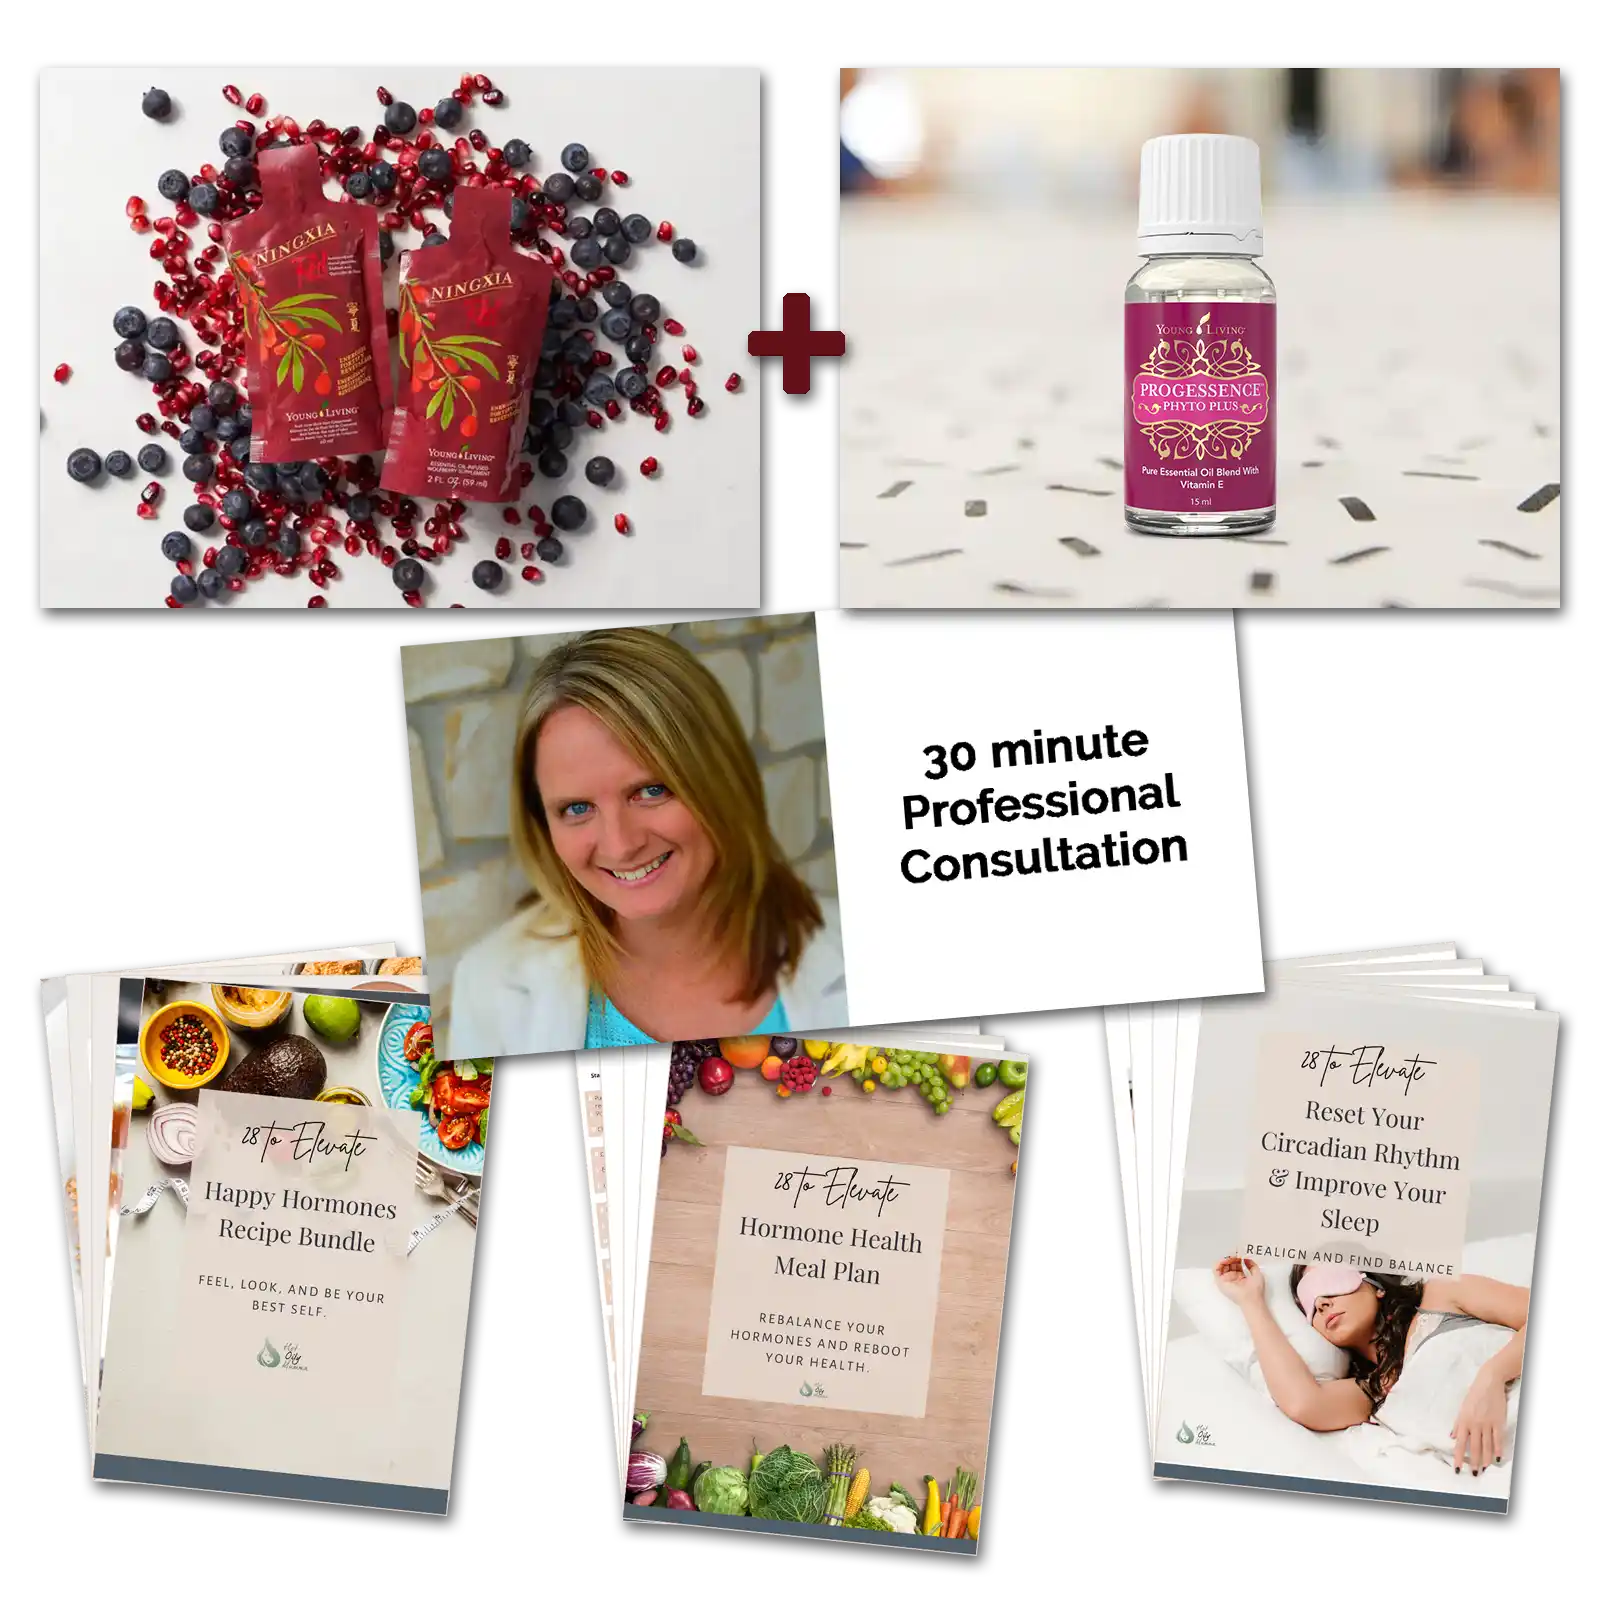 28 to elevate whole bundle ningxia red progessence phyto plus young living